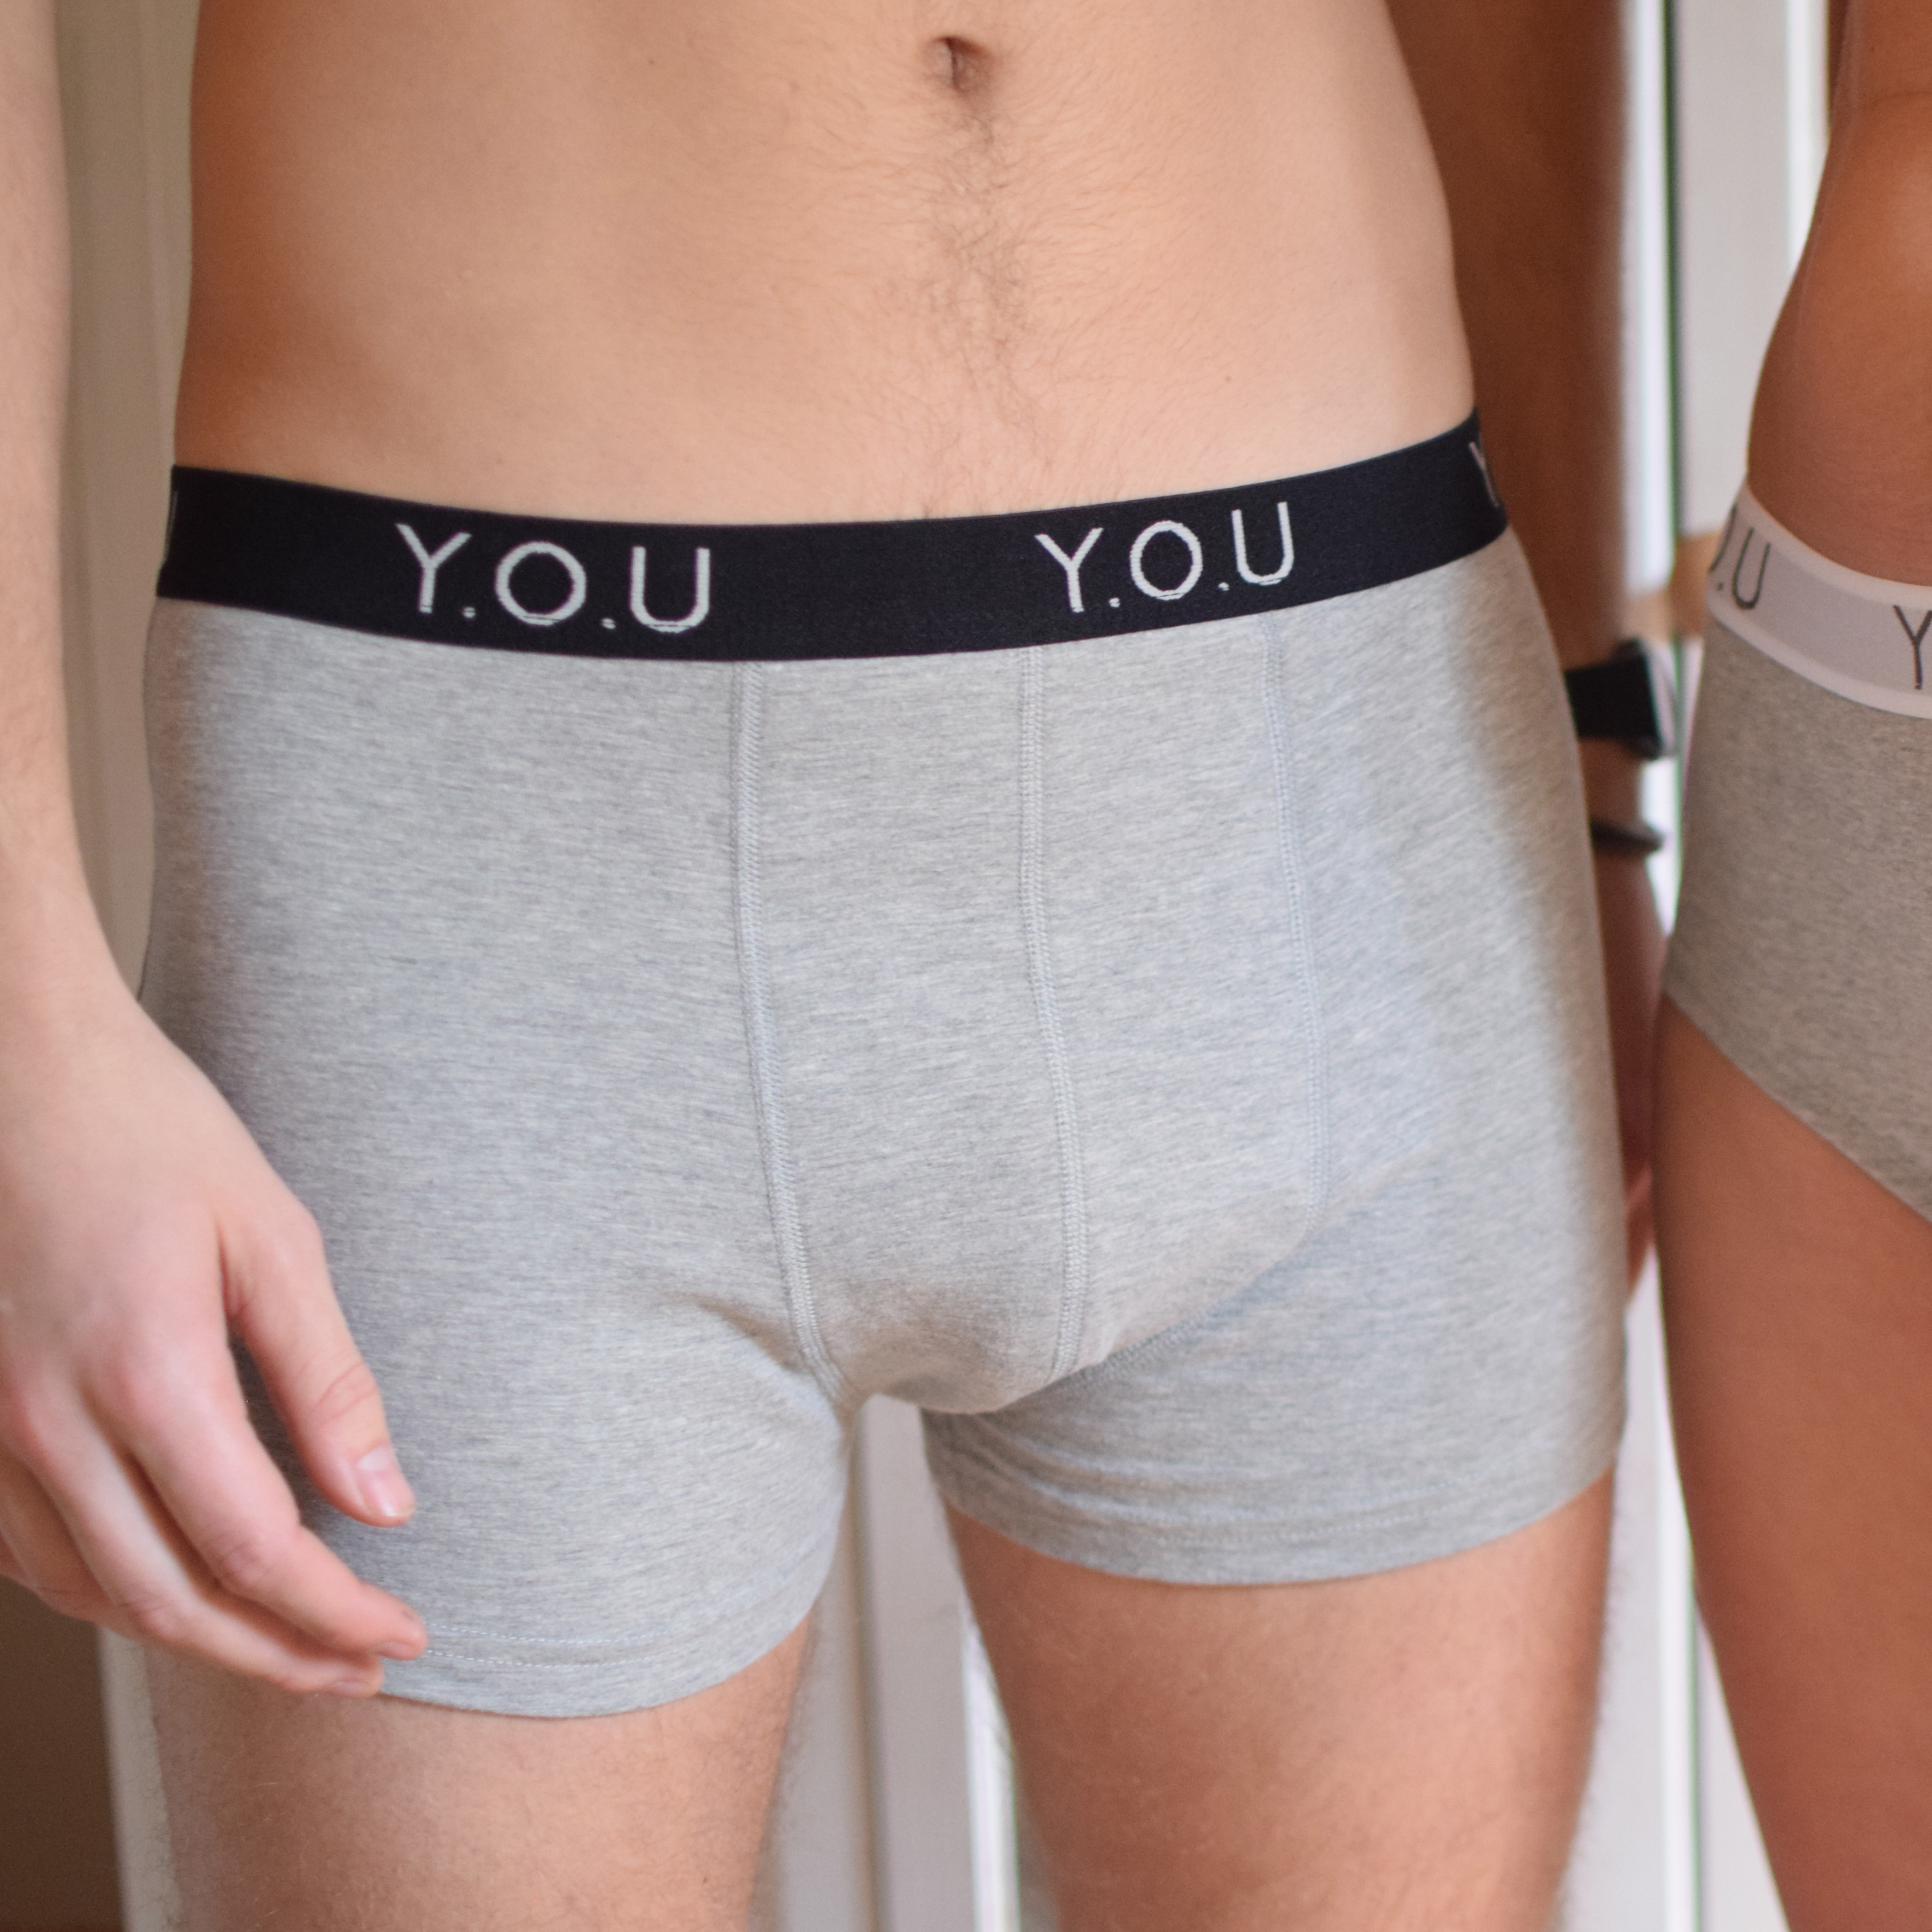 Close-up of two people wearing grey underwear. The person on the left is in grey men's hipster briefs with a black waistband featuring "Y.O.U" in white, made from organic cotton. The person on the right, partially visible, is in similar underwear.